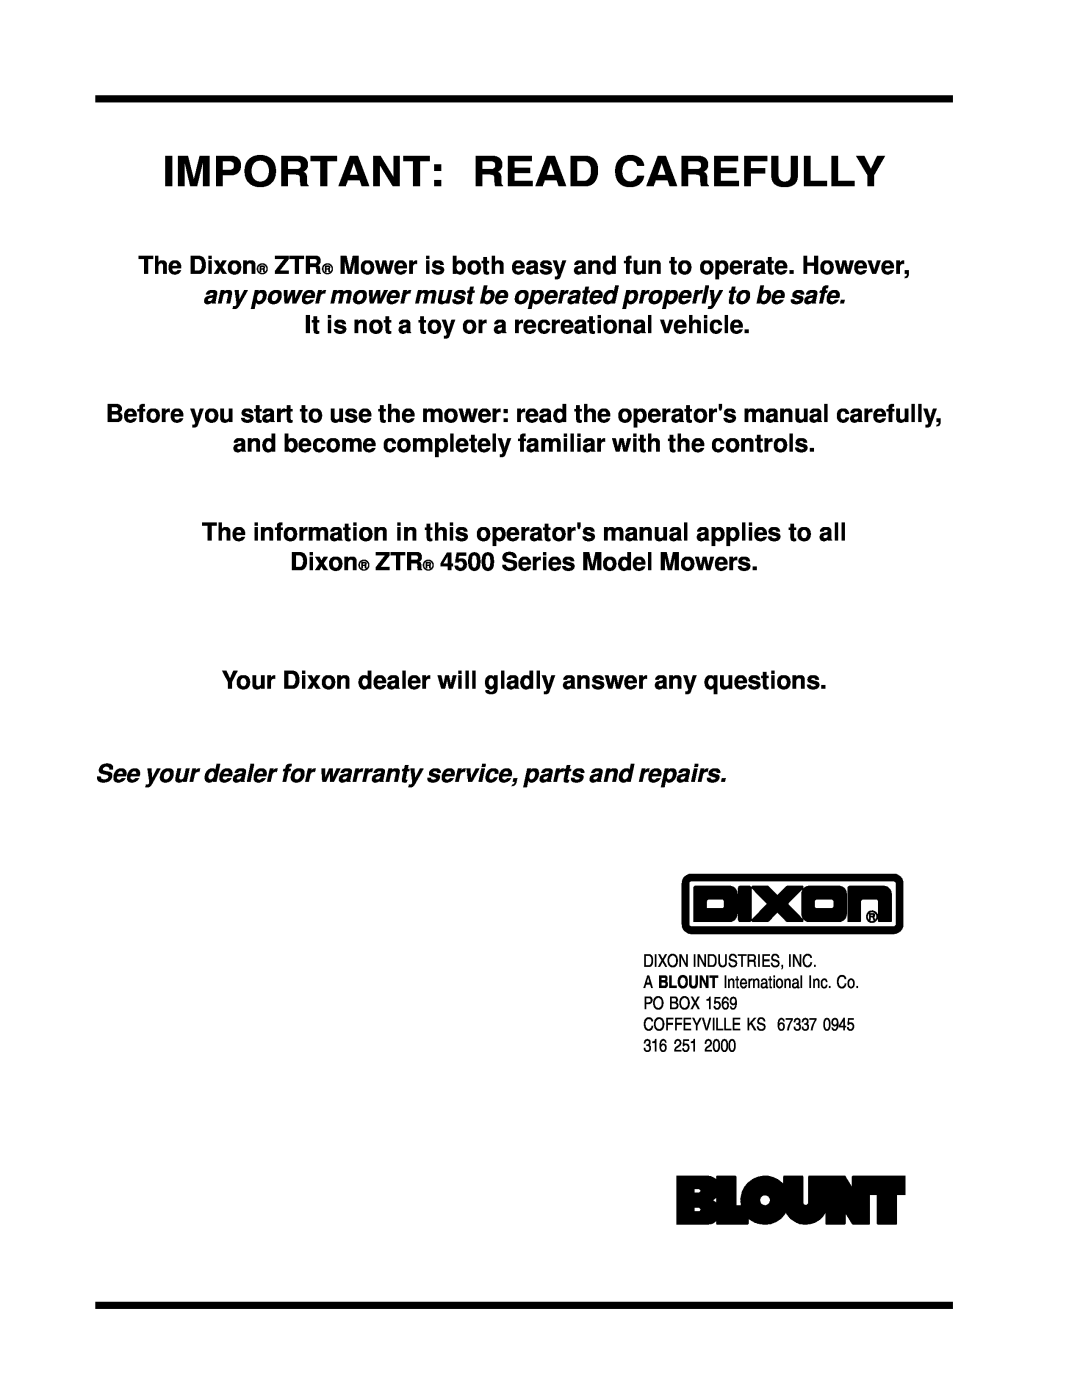 Dixon 13088-1100A manual Important Read Carefully, See your dealer for warranty service, parts and repairs 